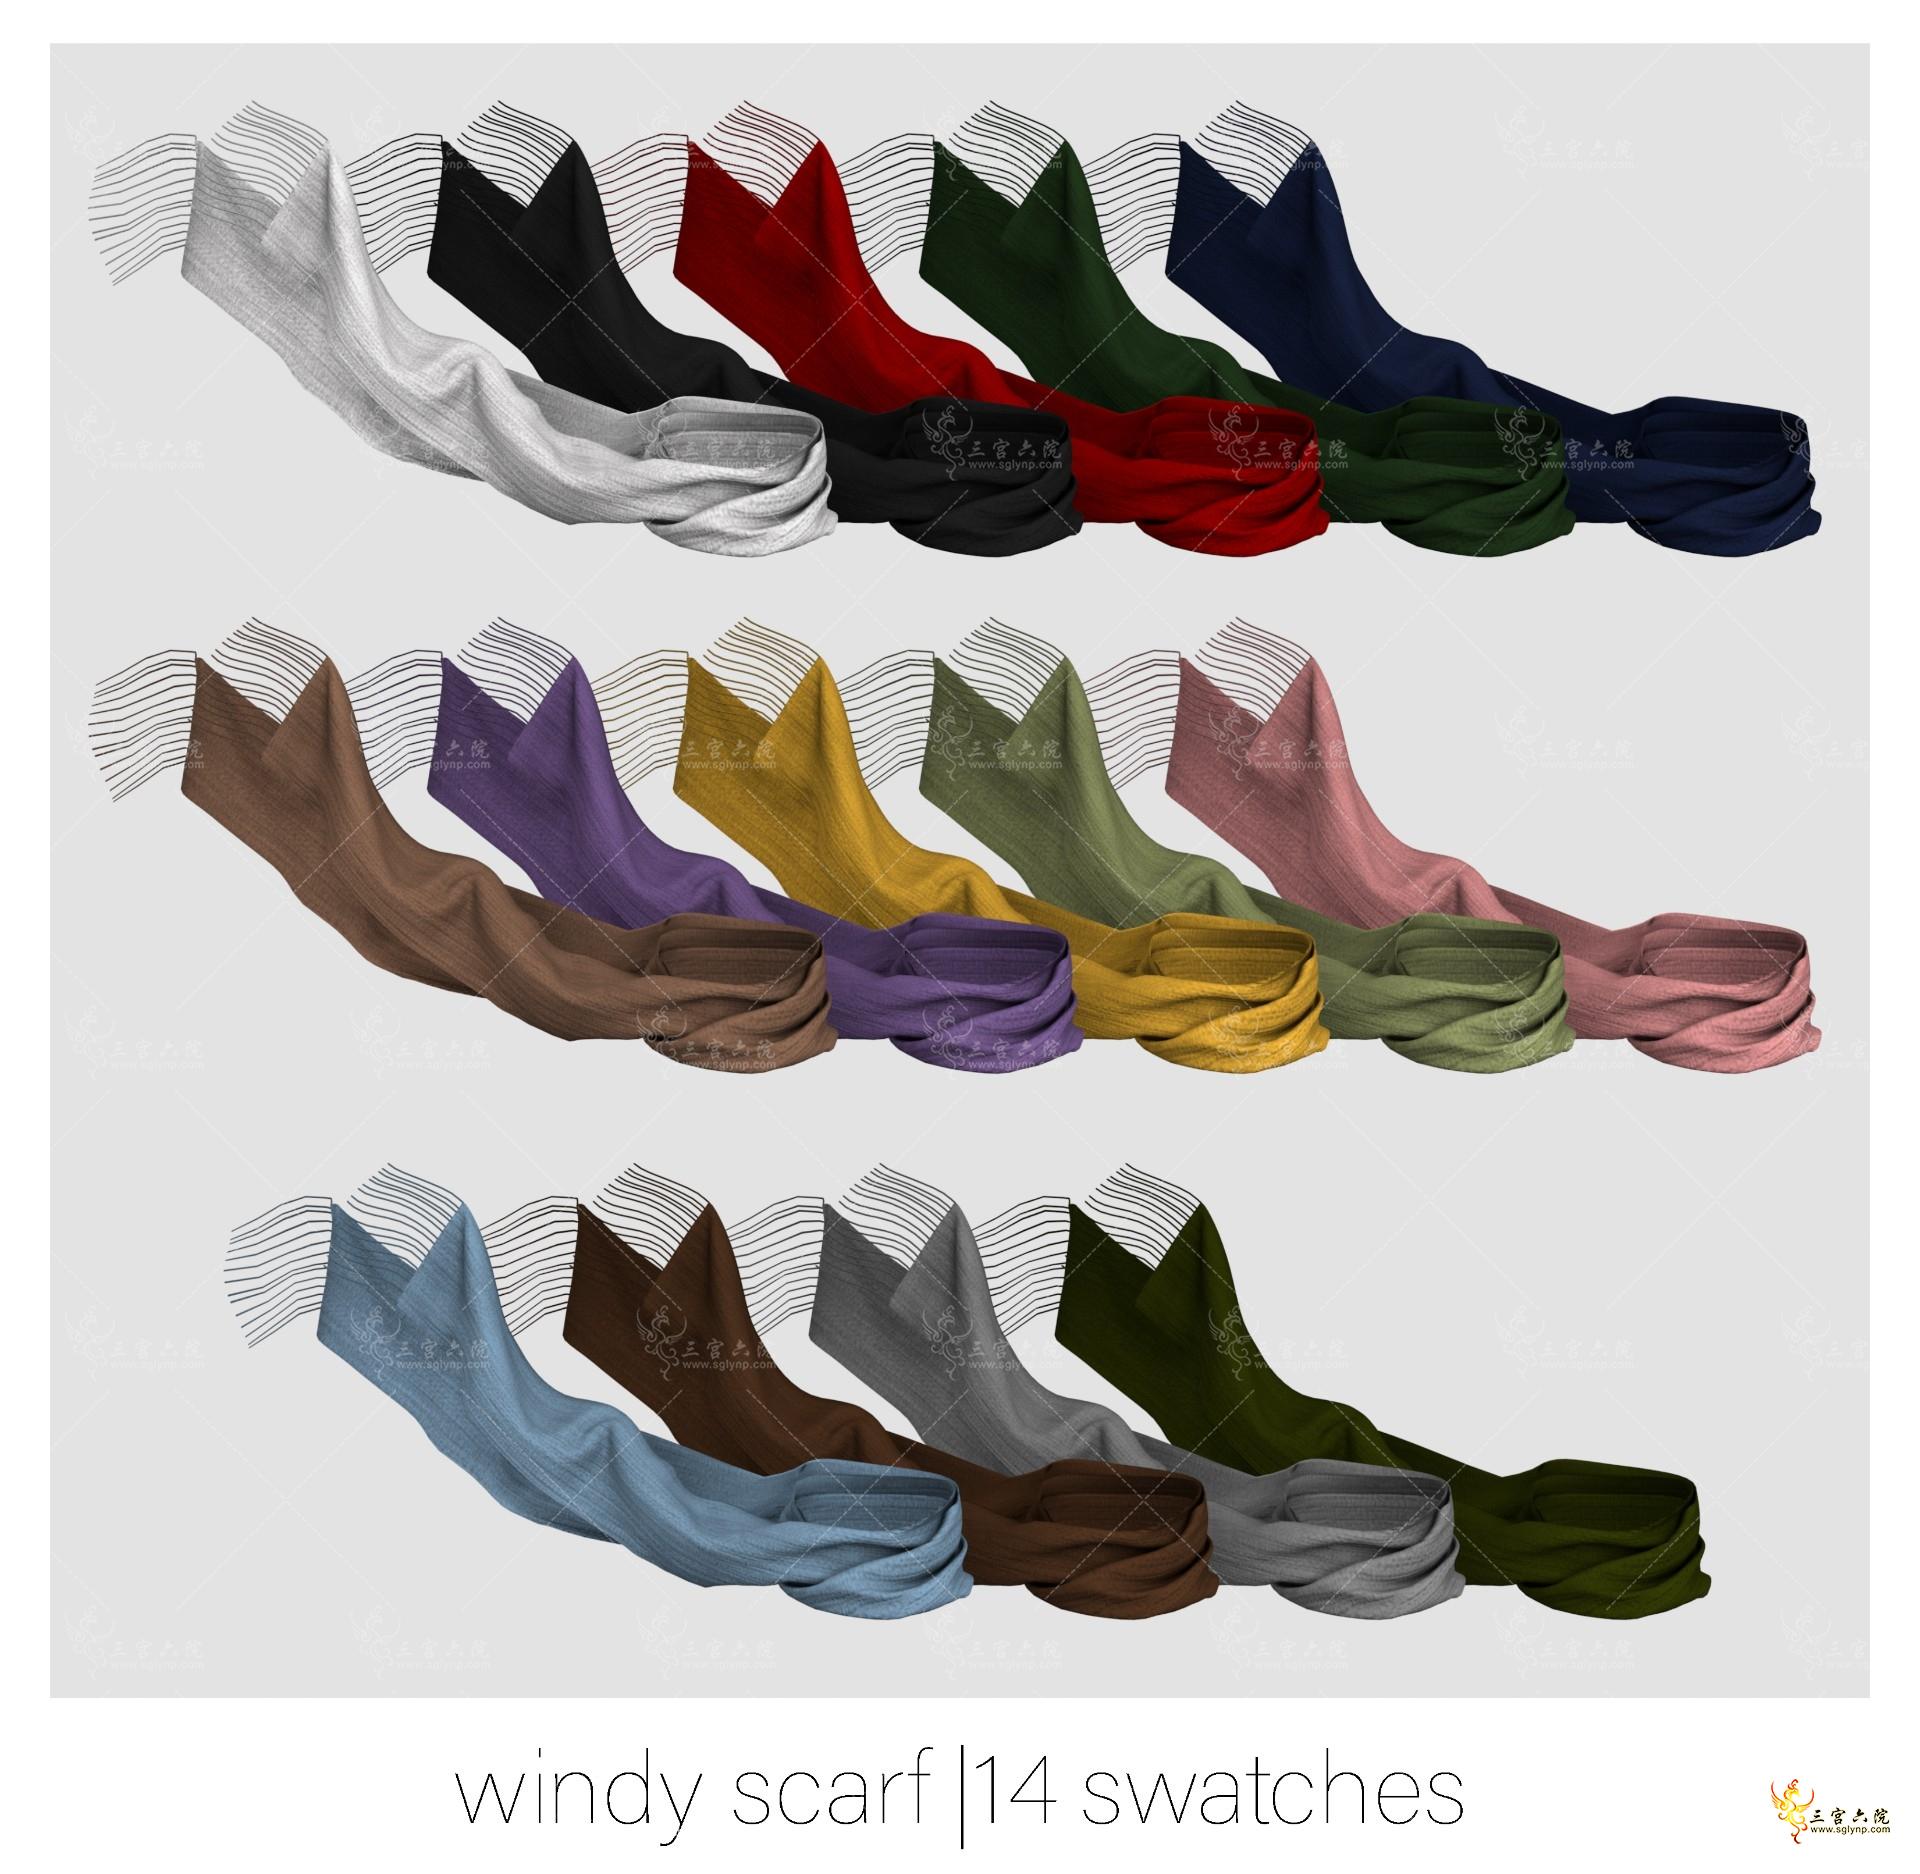 windyscarf_swatches.png